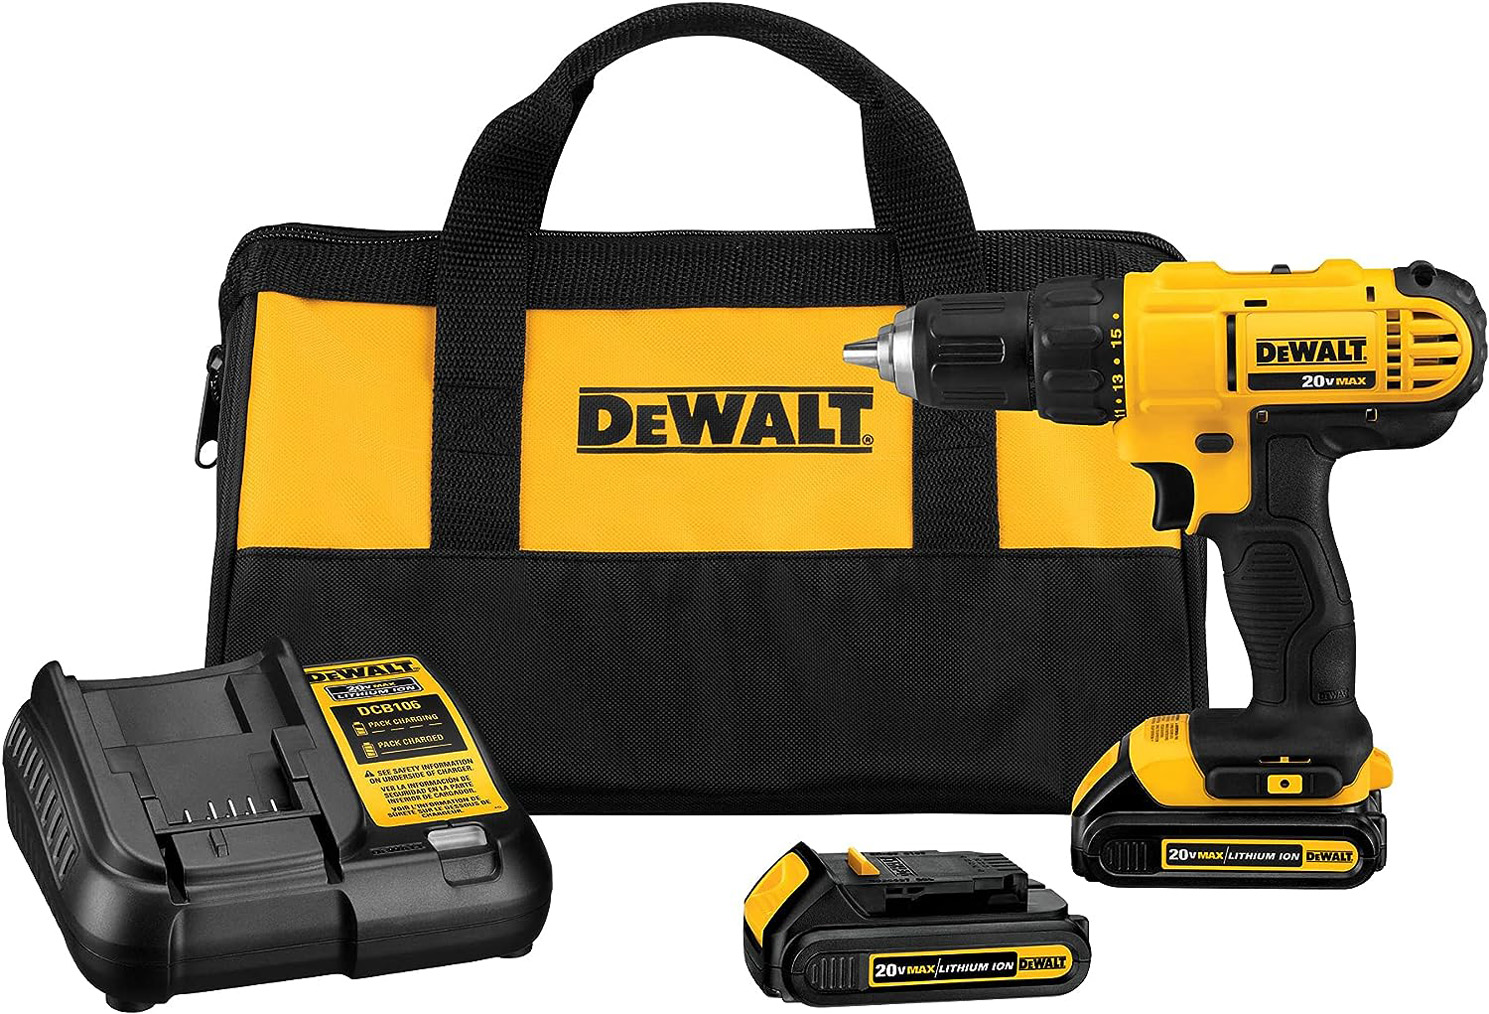 DEWALT Drill DCD771C2 20-volt 1/2-in Cordless (2-Batteries Included and Charger Included)